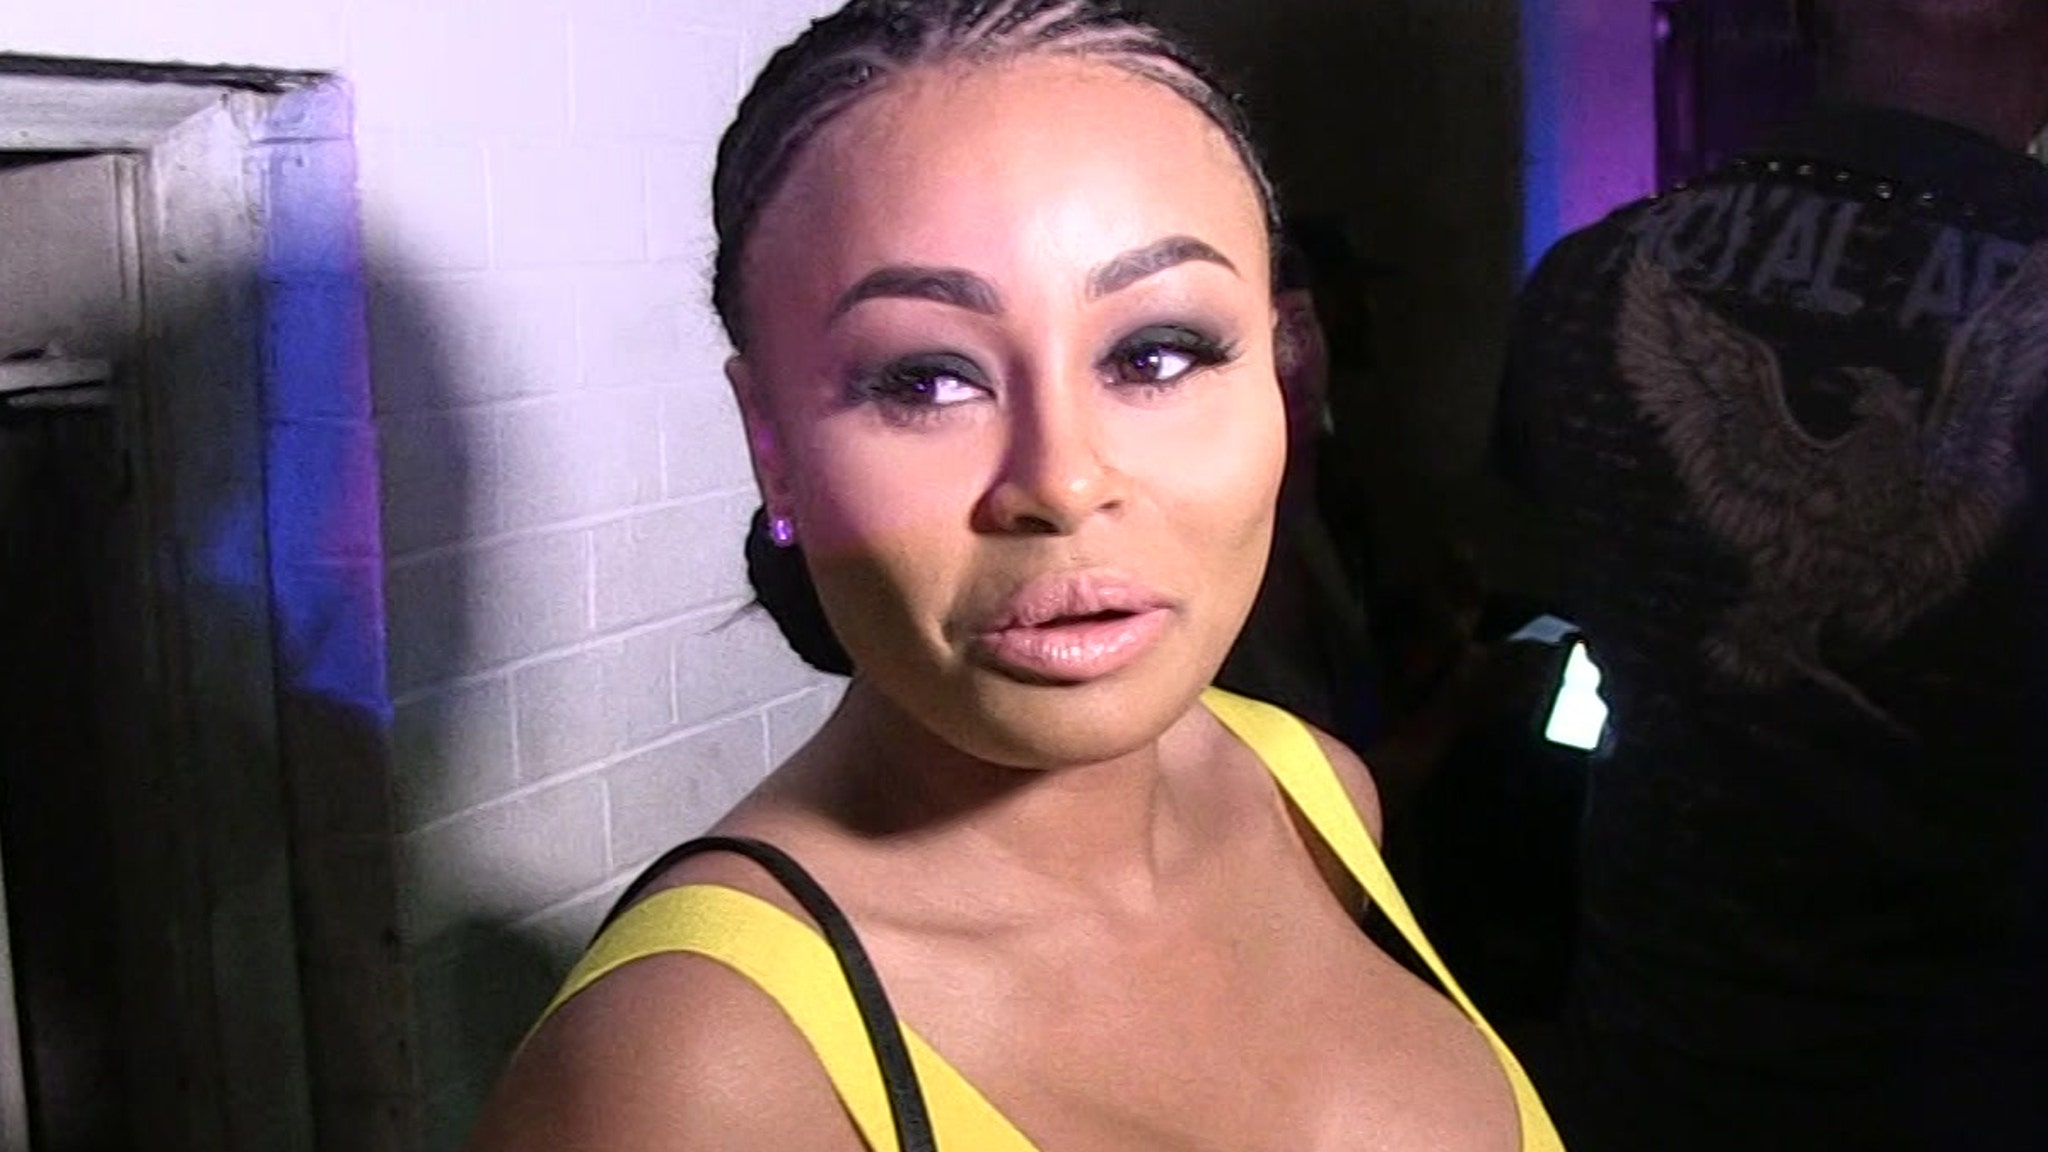 Blac Chyna Suspect in Battery Investigation, Allegedly Kicked Woman in Stomach